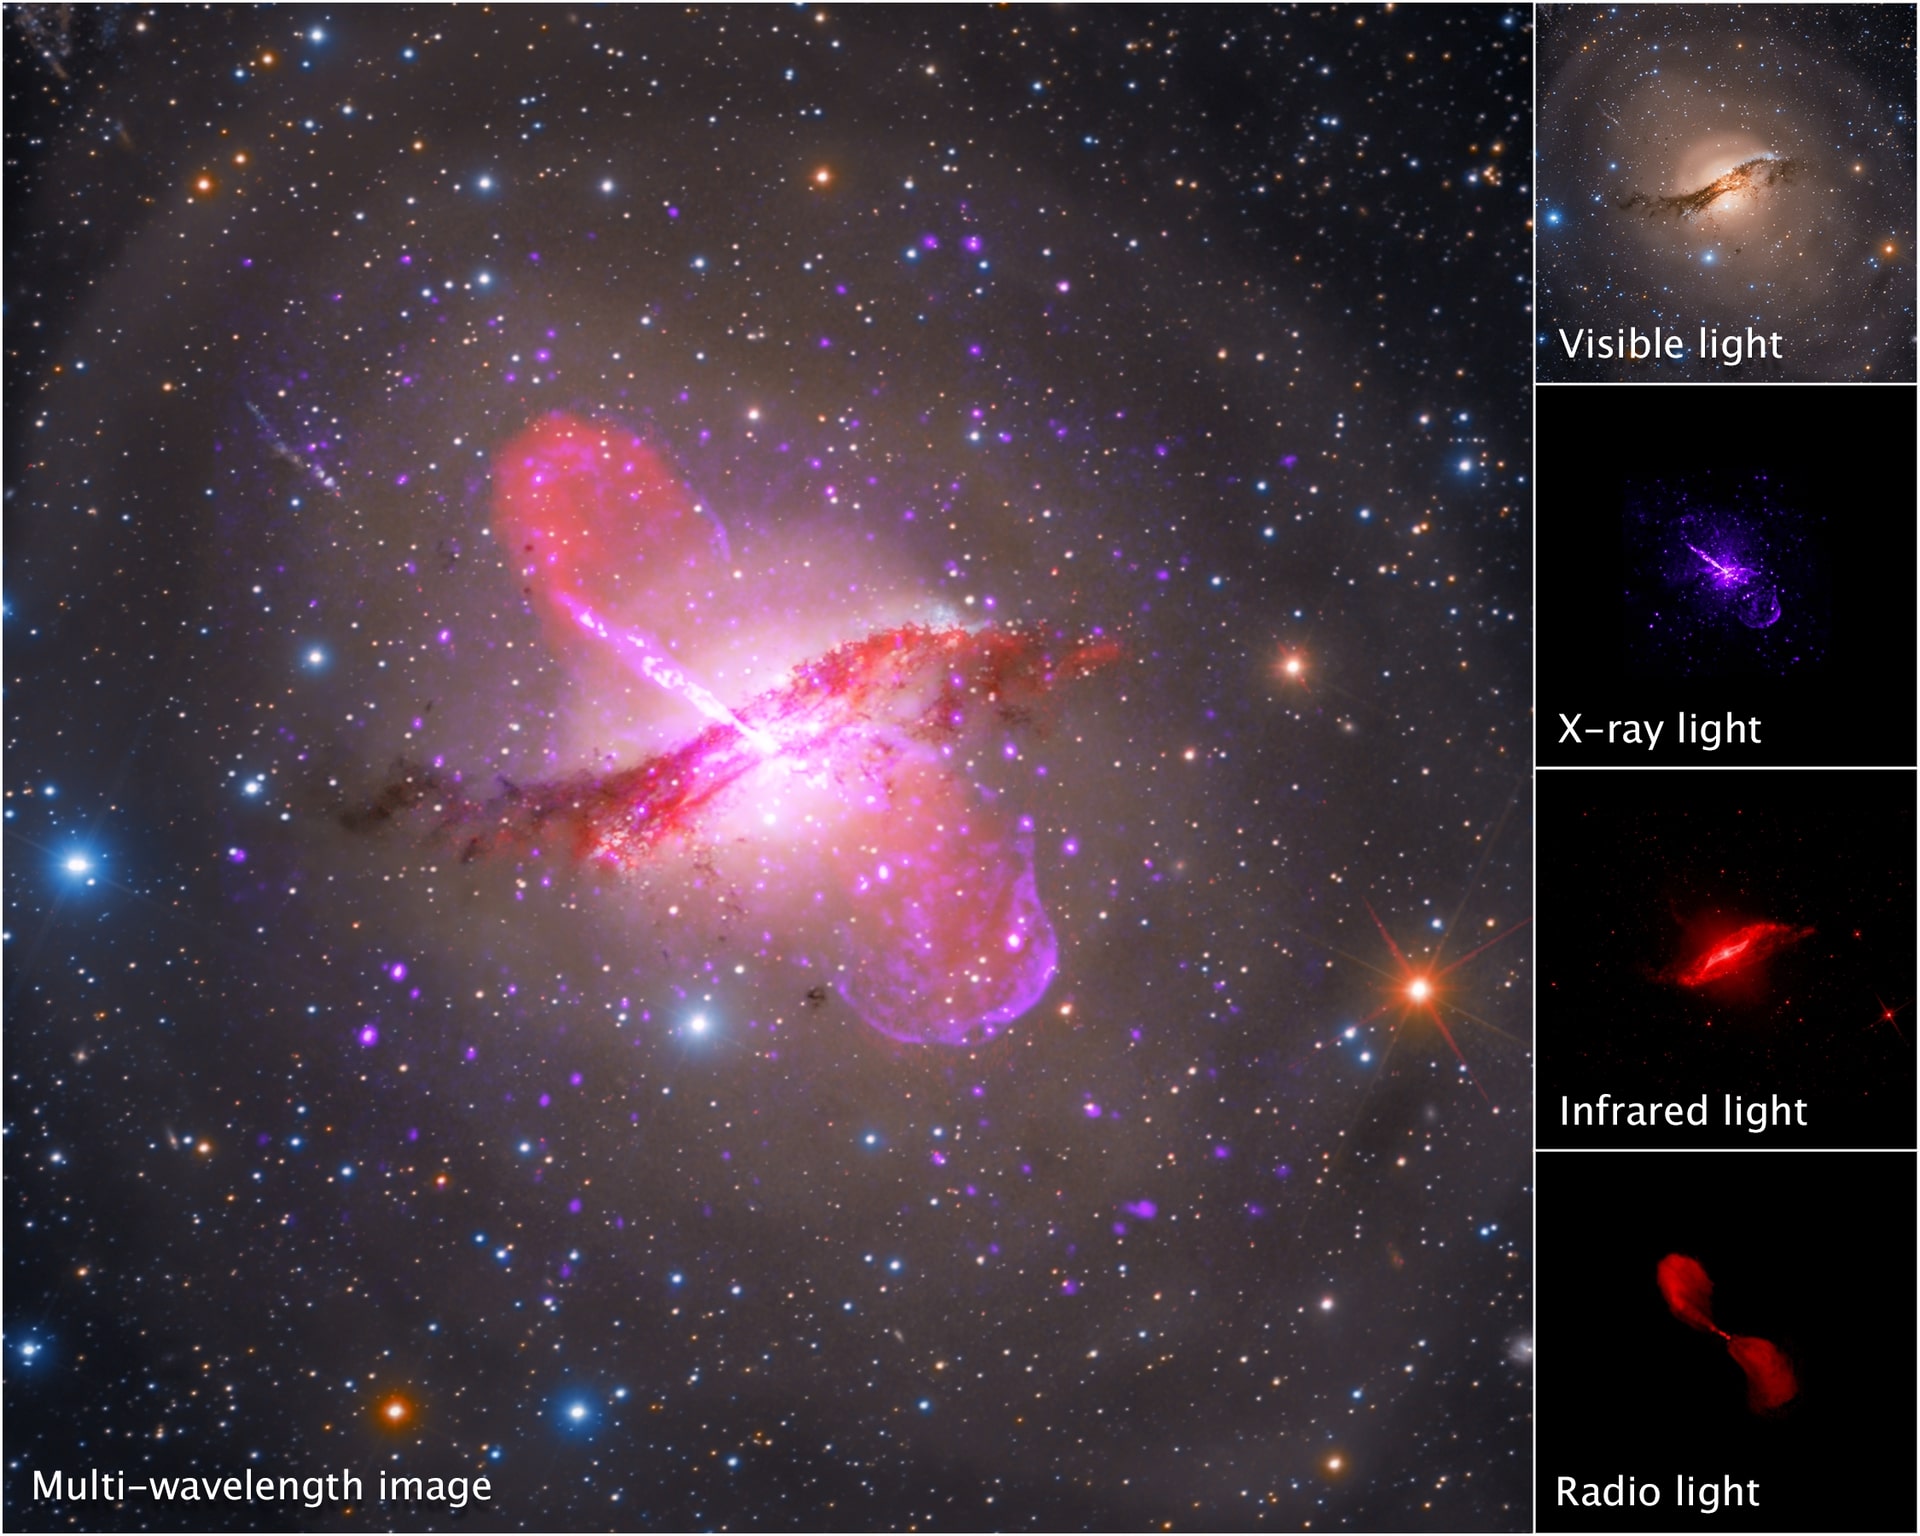 Centaurus A's dusty core is apparent in visible light, but its jets are best viewed in X-ray and radio light.